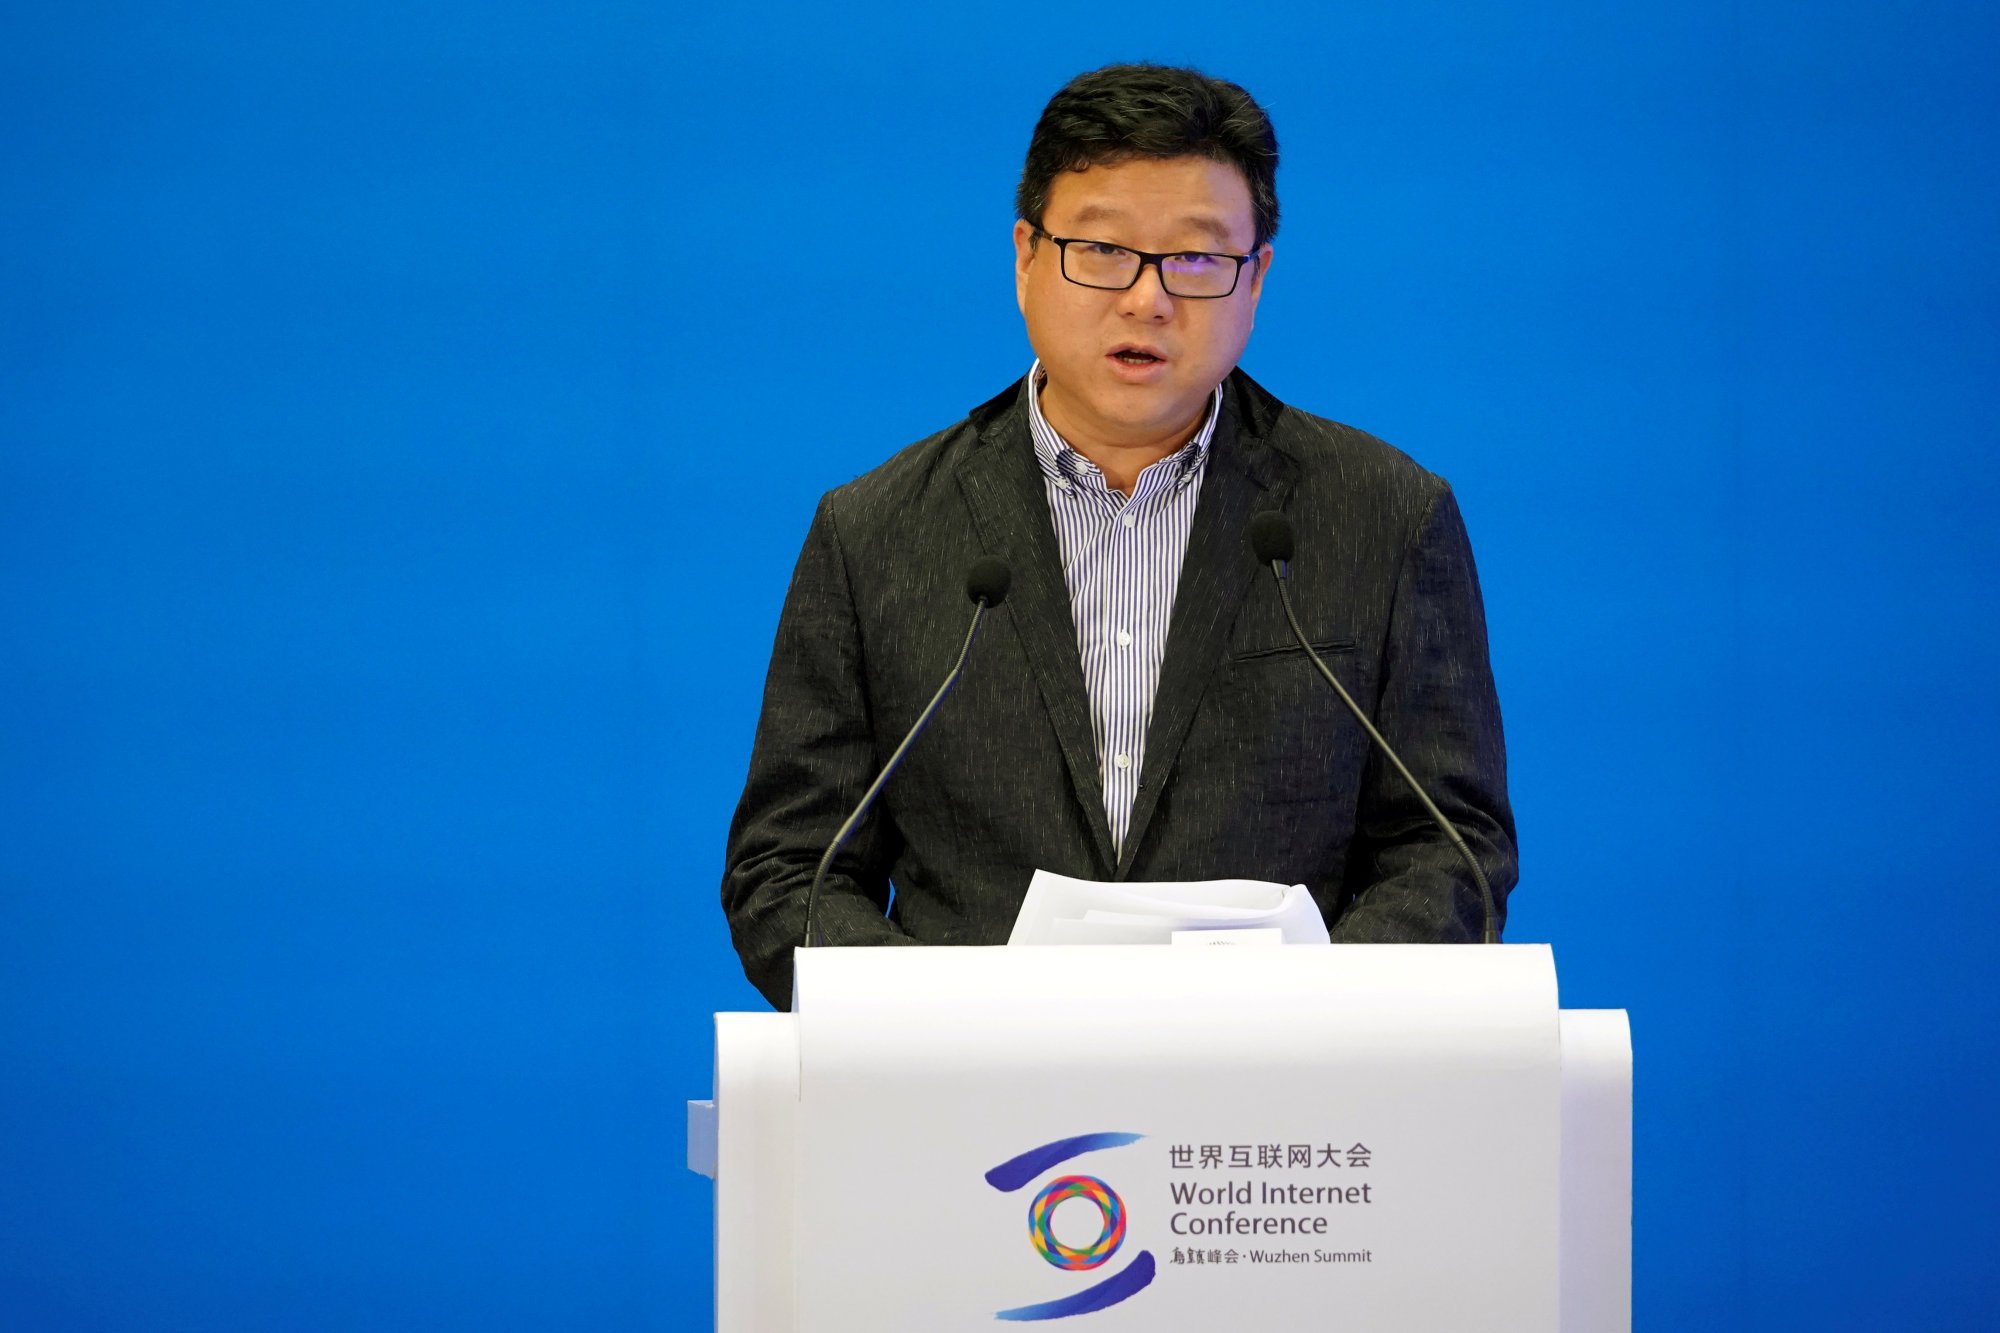 Ding Lei, founder and CEO of NetEase, attends the World Internet Conference in Wuzhen, Zhejiang province, China, in October 2019. Photo: Reuters